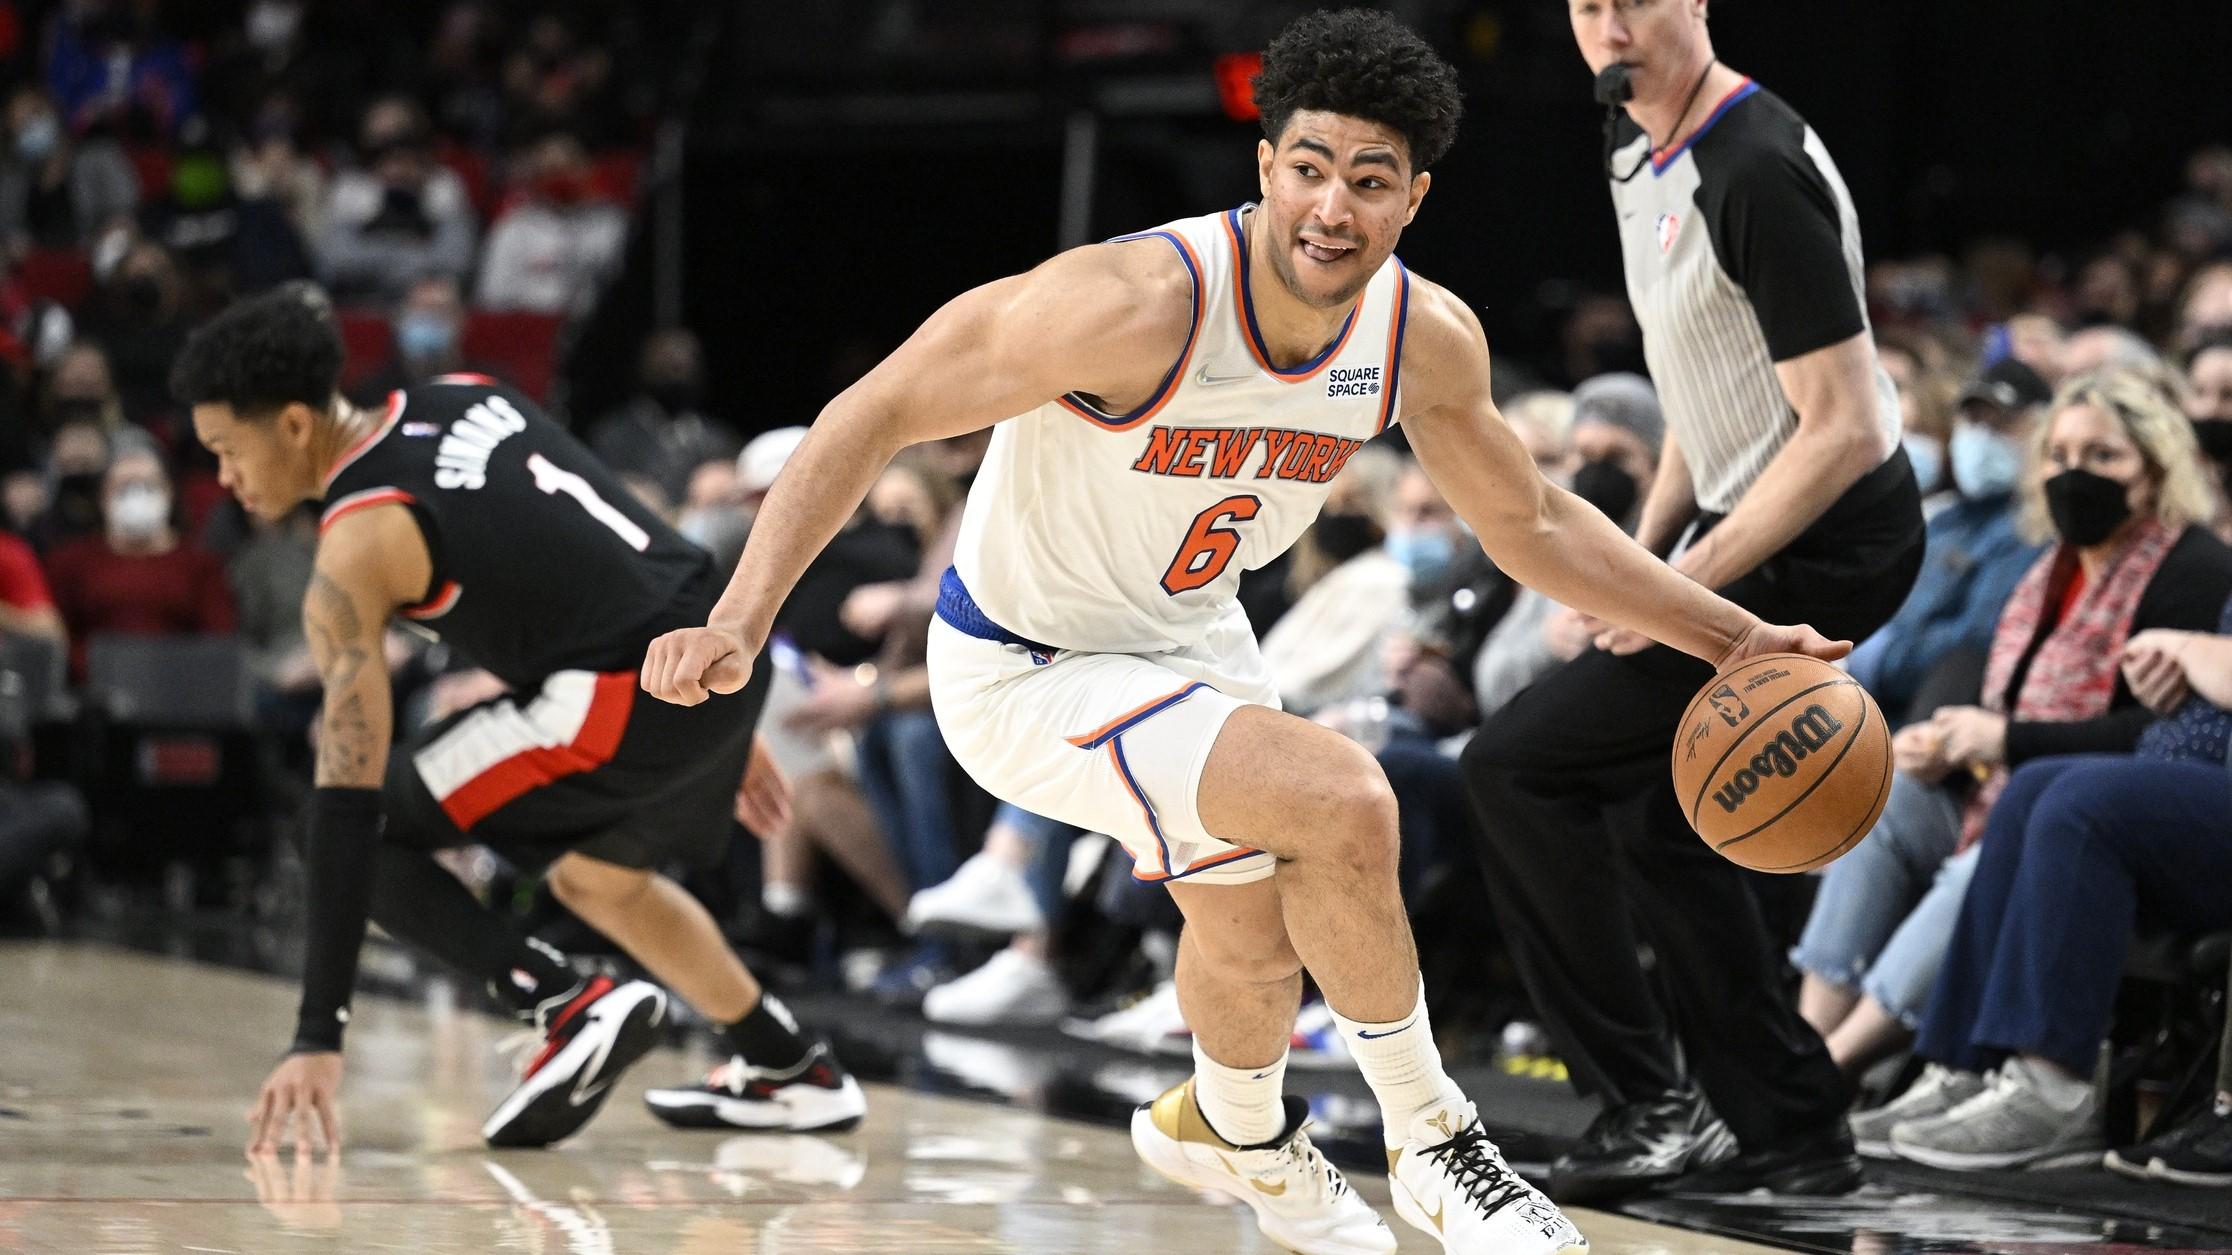 Feb 12, 2022; Portland, Oregon, USA; New York Knicks guard Quentin Grimes (6) steals the basket ball during the the second half against Portland Trail Blazers guard Anfernee Simons (1) at Moda Center. / Troy Wayrynen-USA TODAY Sports